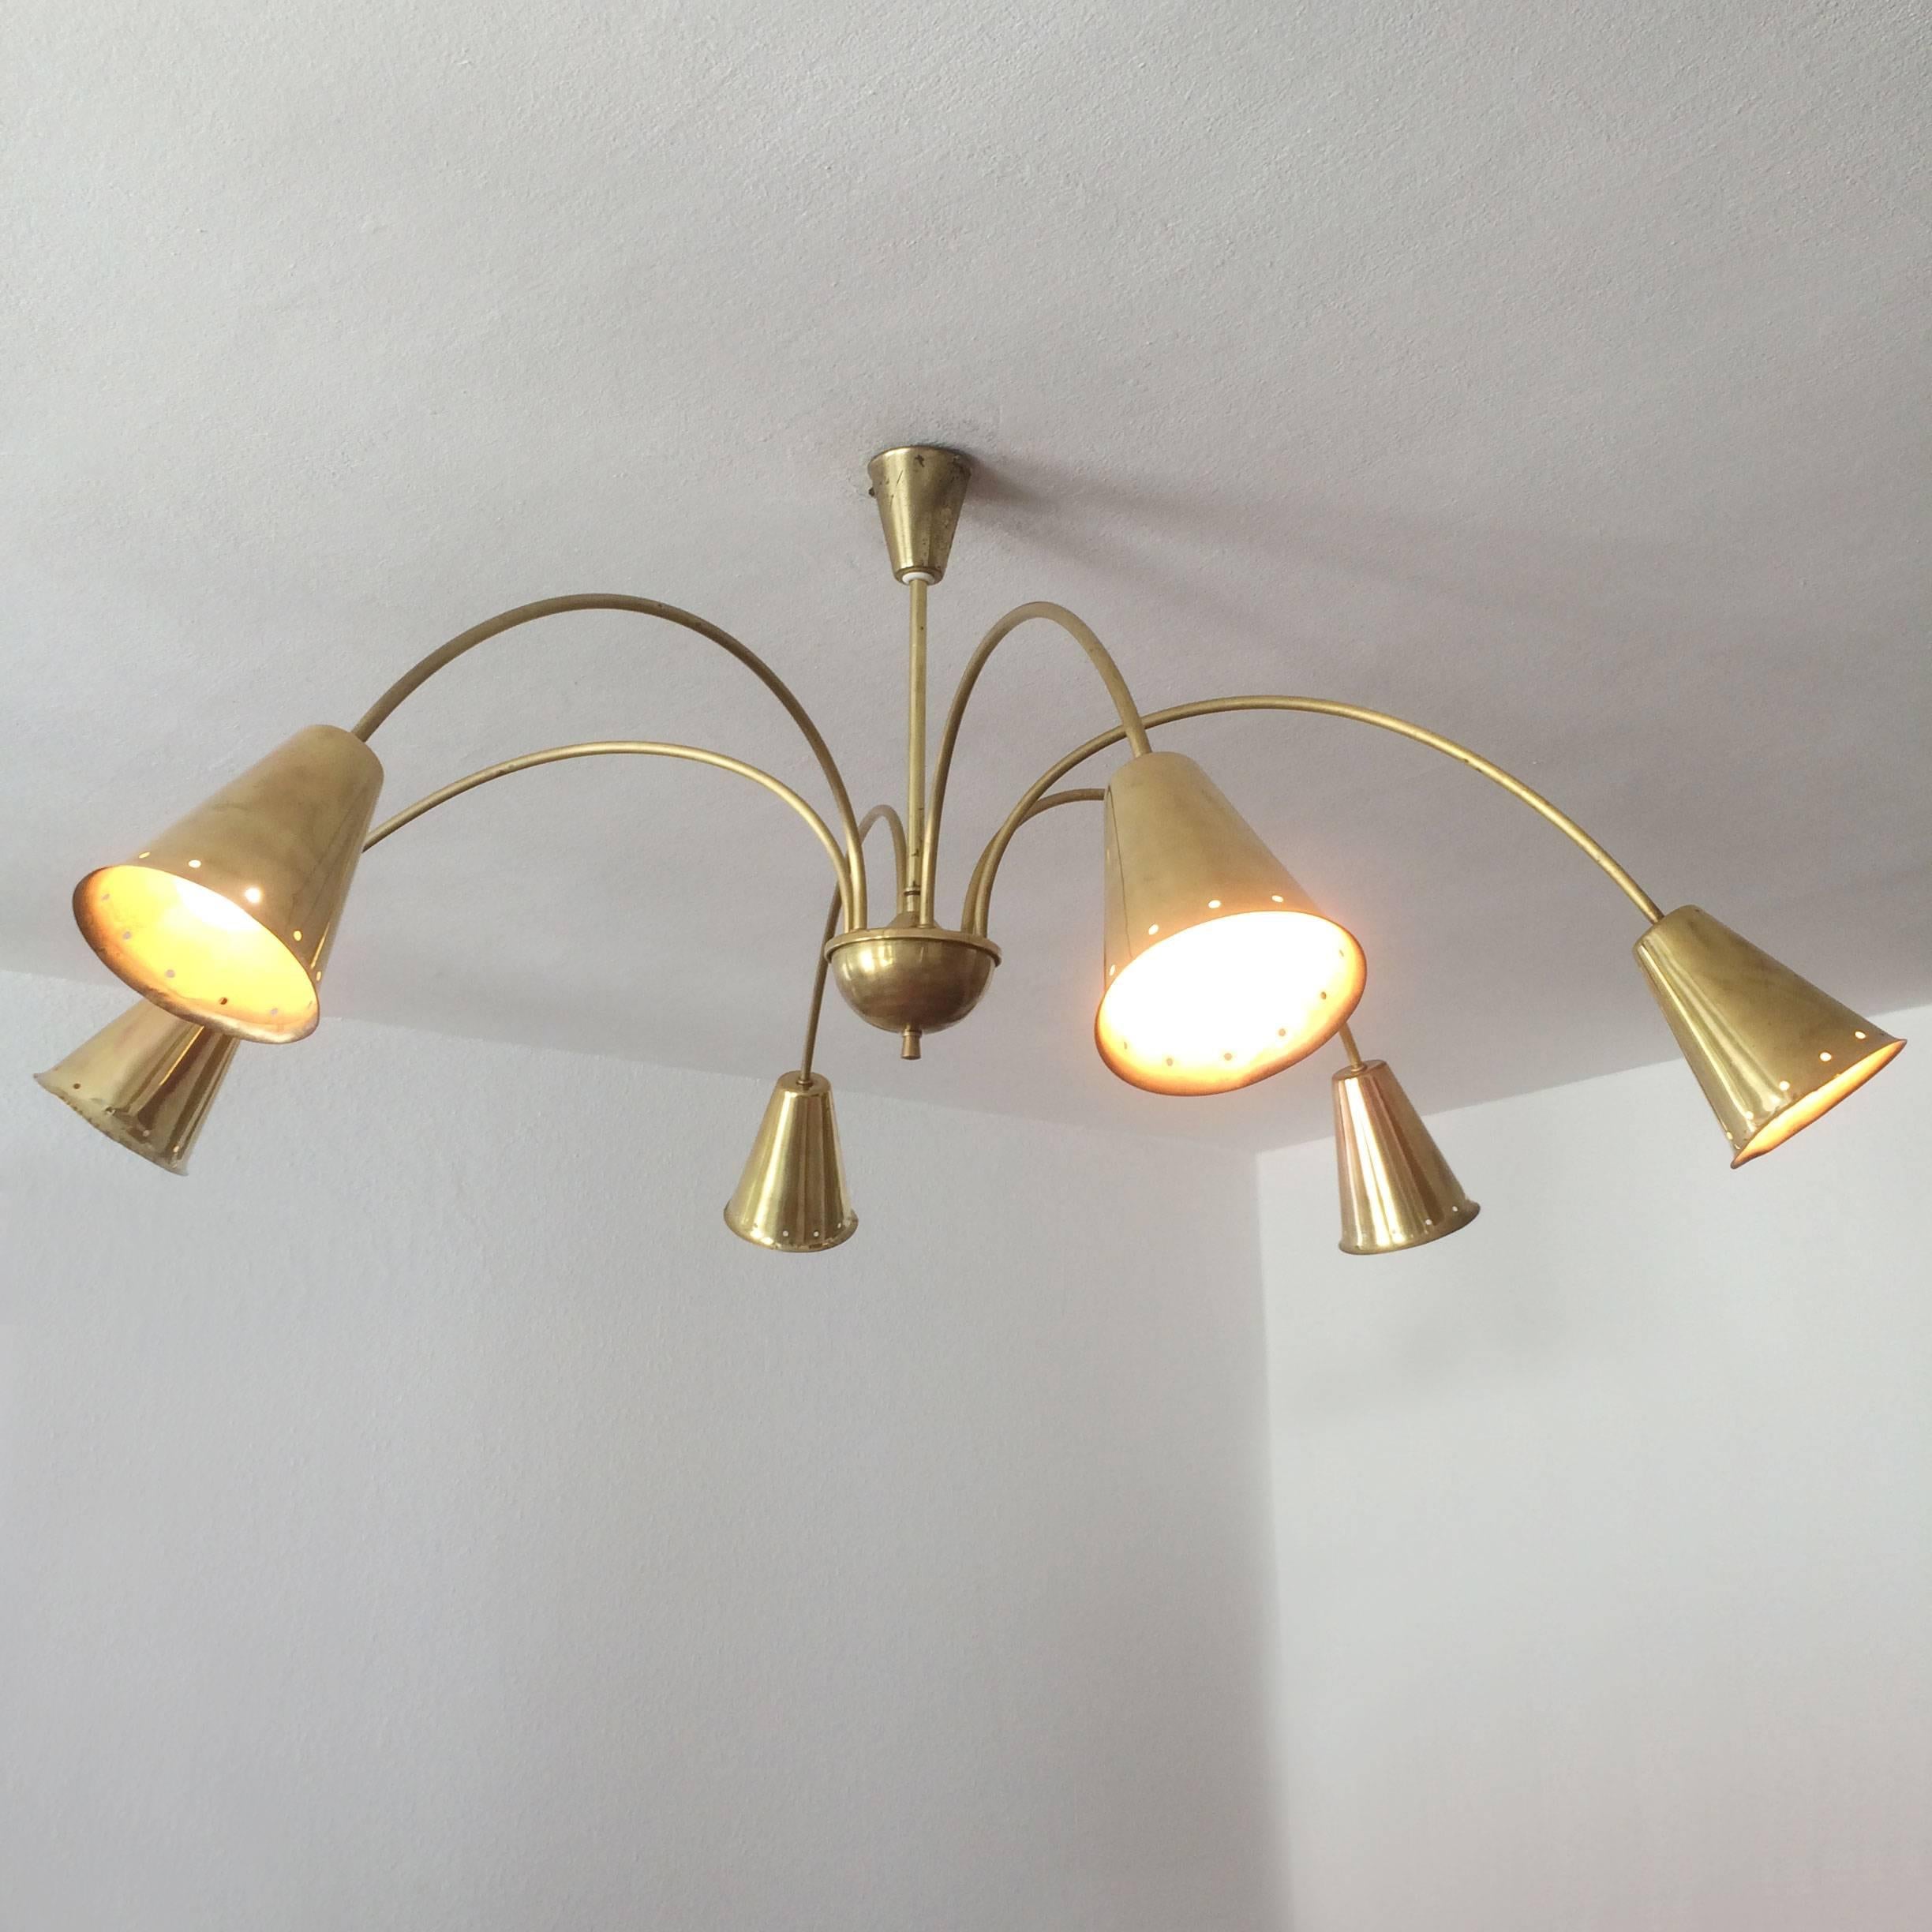 Monumental Mid-Century Modern six-armed chandelier or pendant light with perforated large lamp shades in brass. Designed and manufactured probably in Germany in 1950s.
The lamp is executed with six E27 screw fit bulb holders, wired and in working